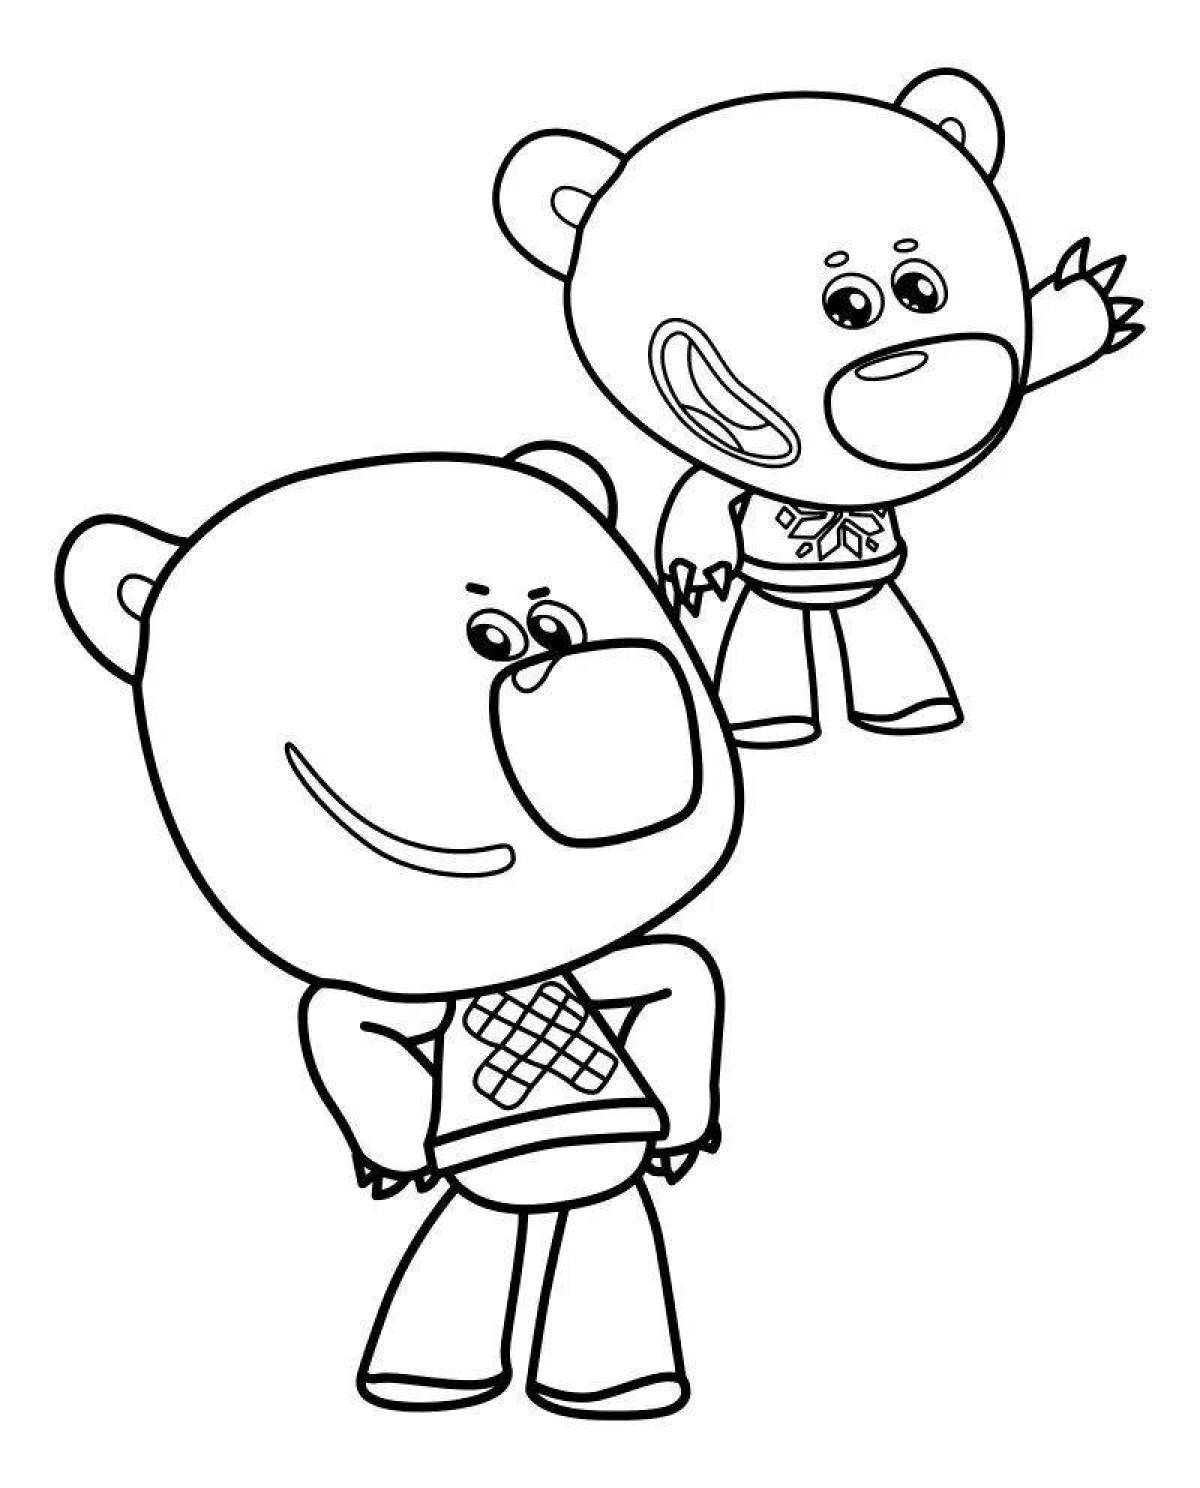 Cute cute innocent coloring pages